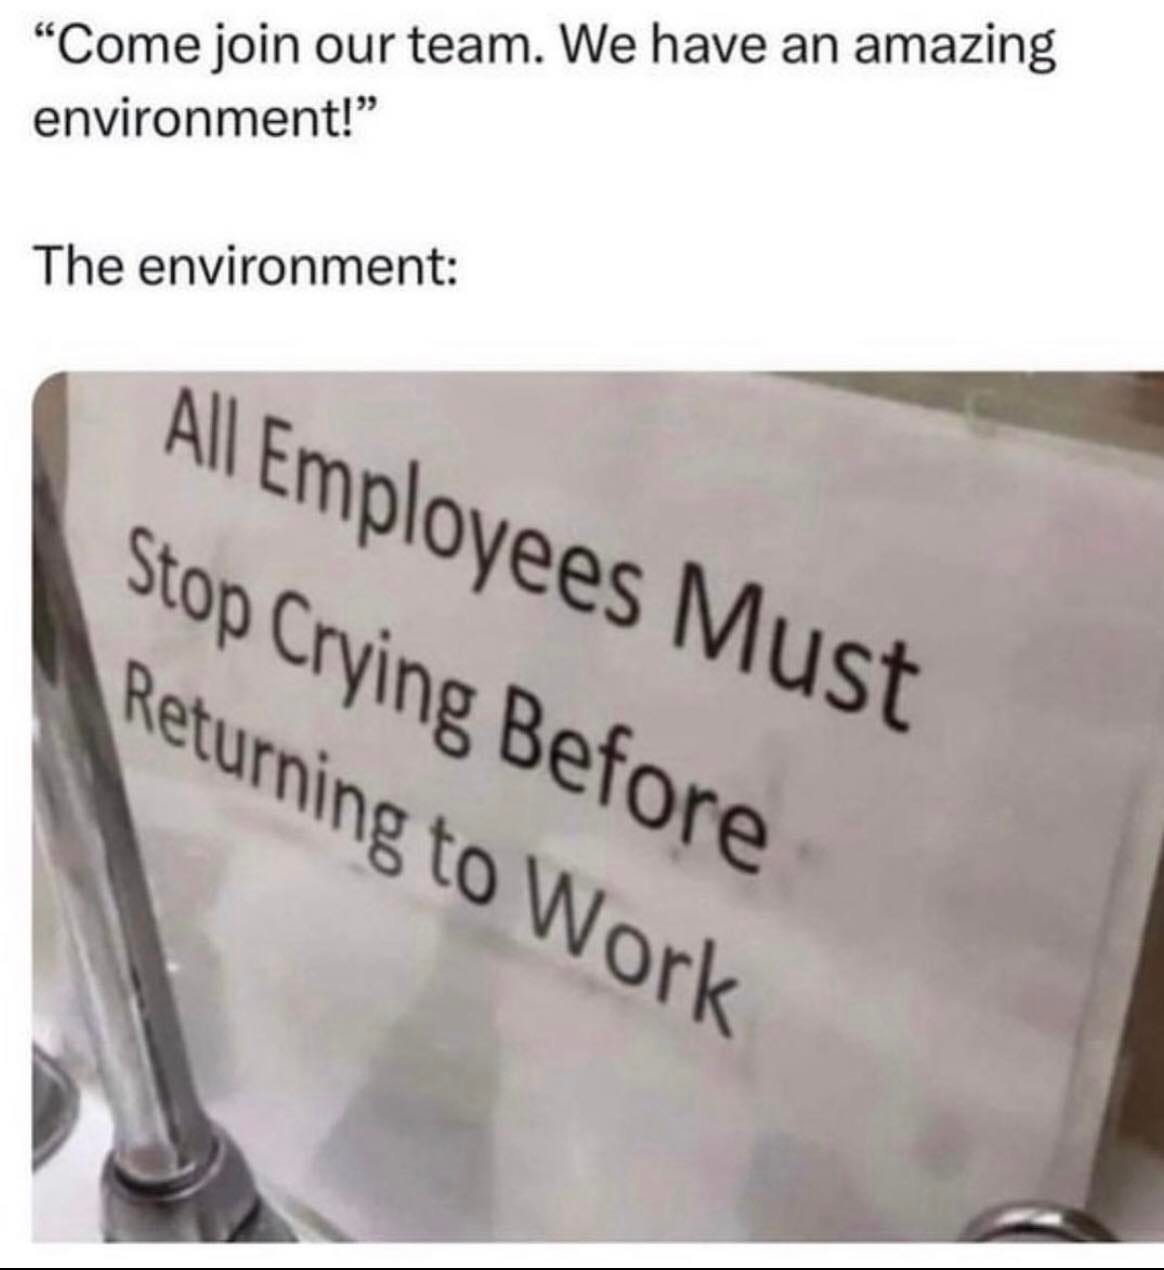 May be an image of text that says '"Come join our team. We have an amazing environment!" The environment: All Retuinet Before Stop Employees Must to Work'